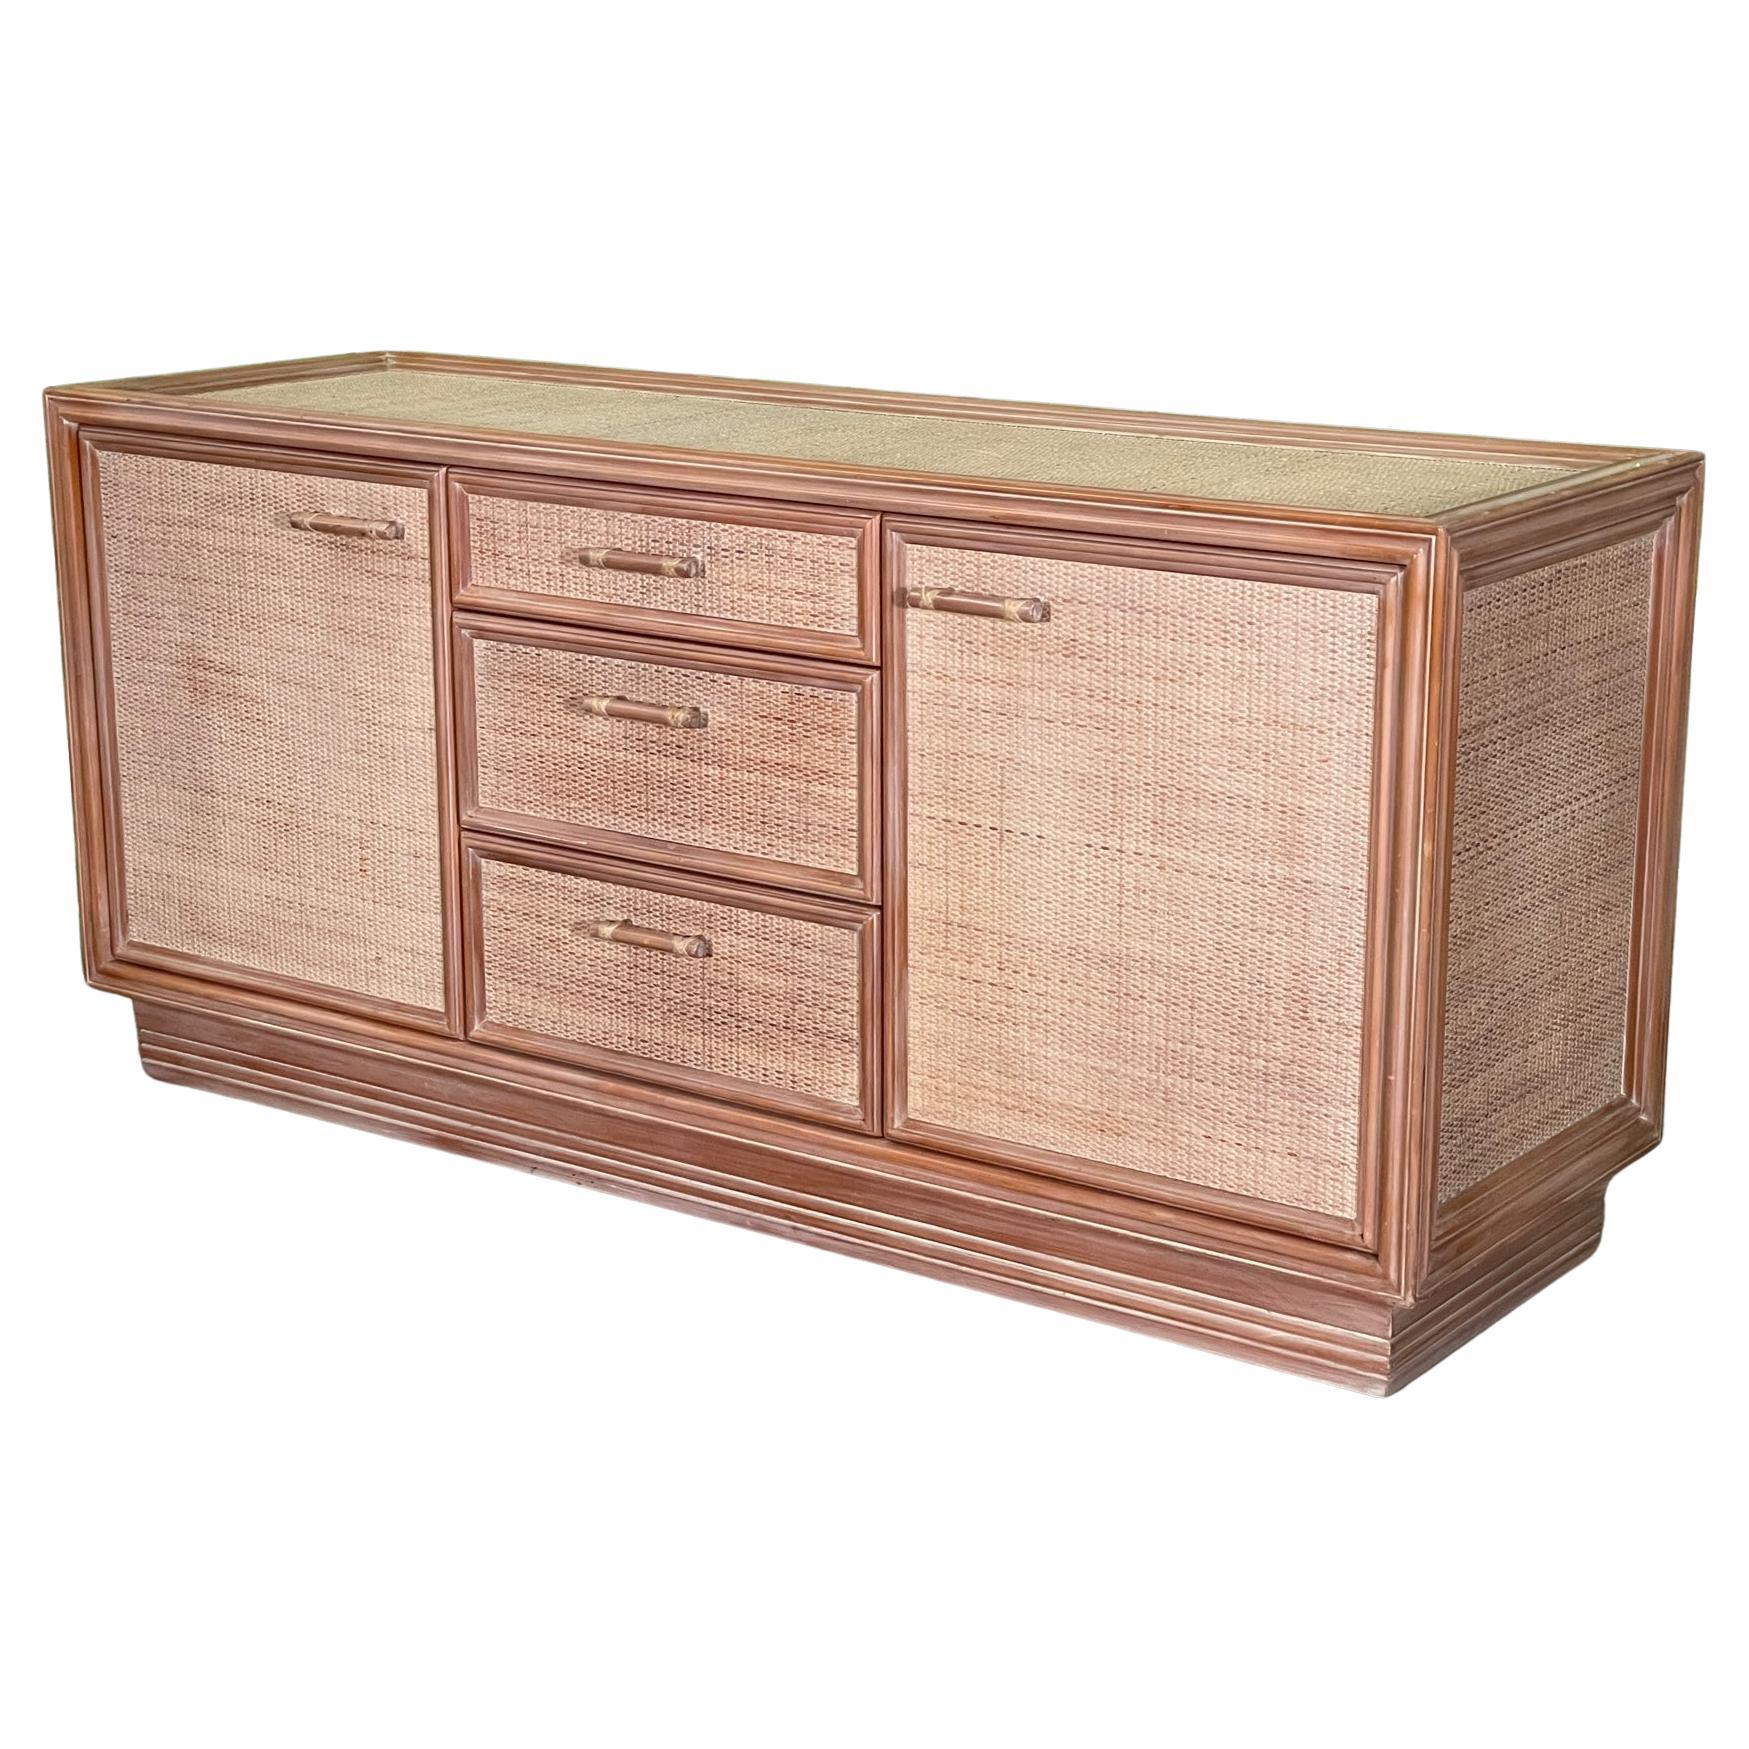 Rattan and Wicker Sideboard or Buffet Attribute to McGuire For Sale